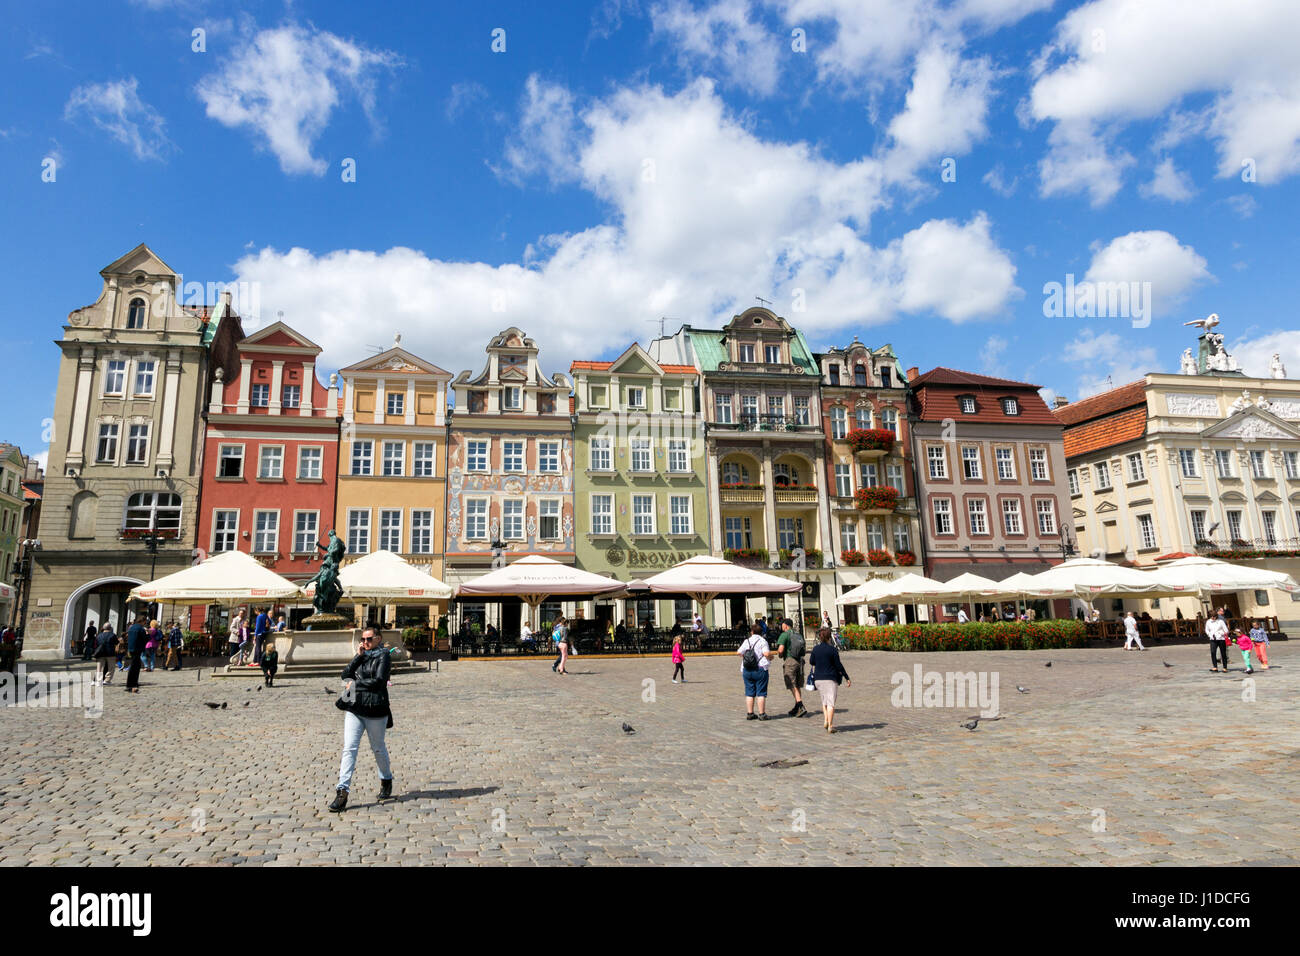 POZNAN, POLAND - AUG 20, 2014: Colorfull houses on the central square in Poznan, Poland. The city is the 4th largest and the 3rd most visited city in  Stock Photo